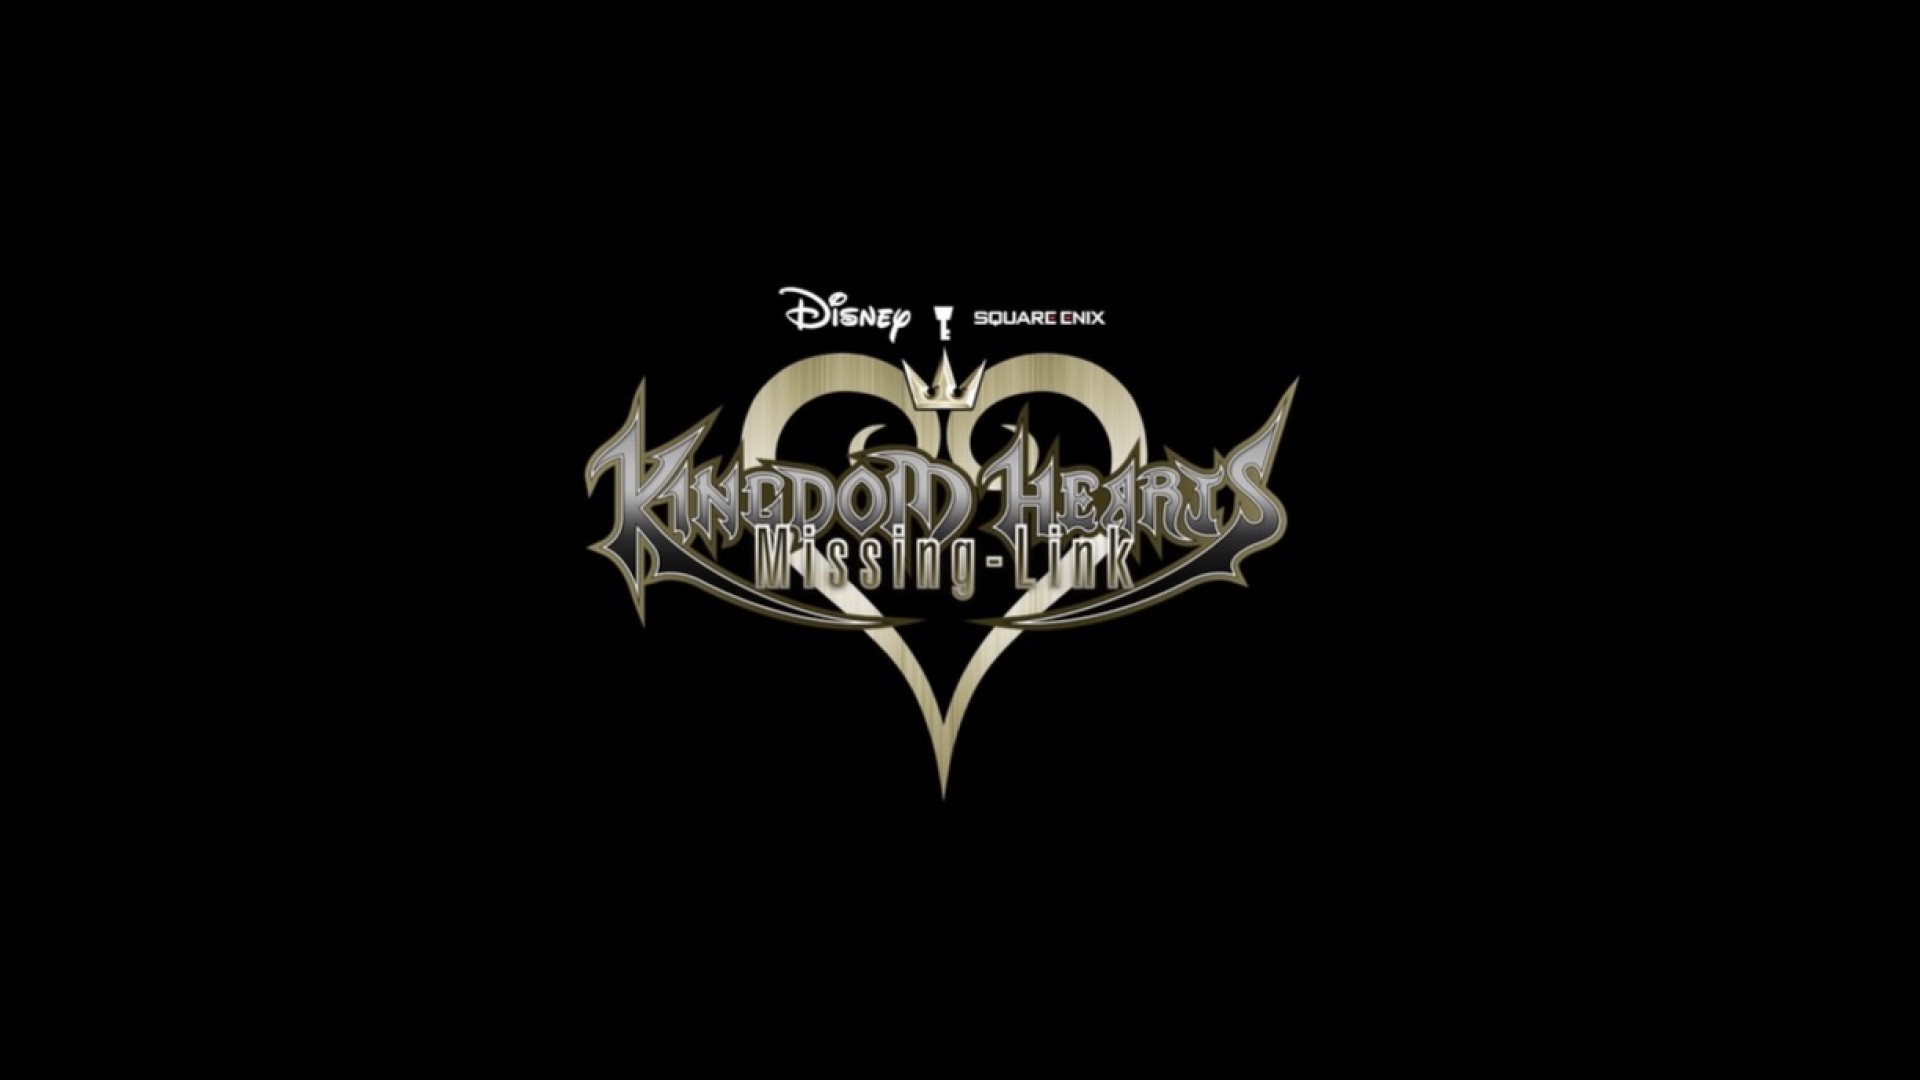 Kingdom Hearts Missing-Link Announced - New KH Mobile Game